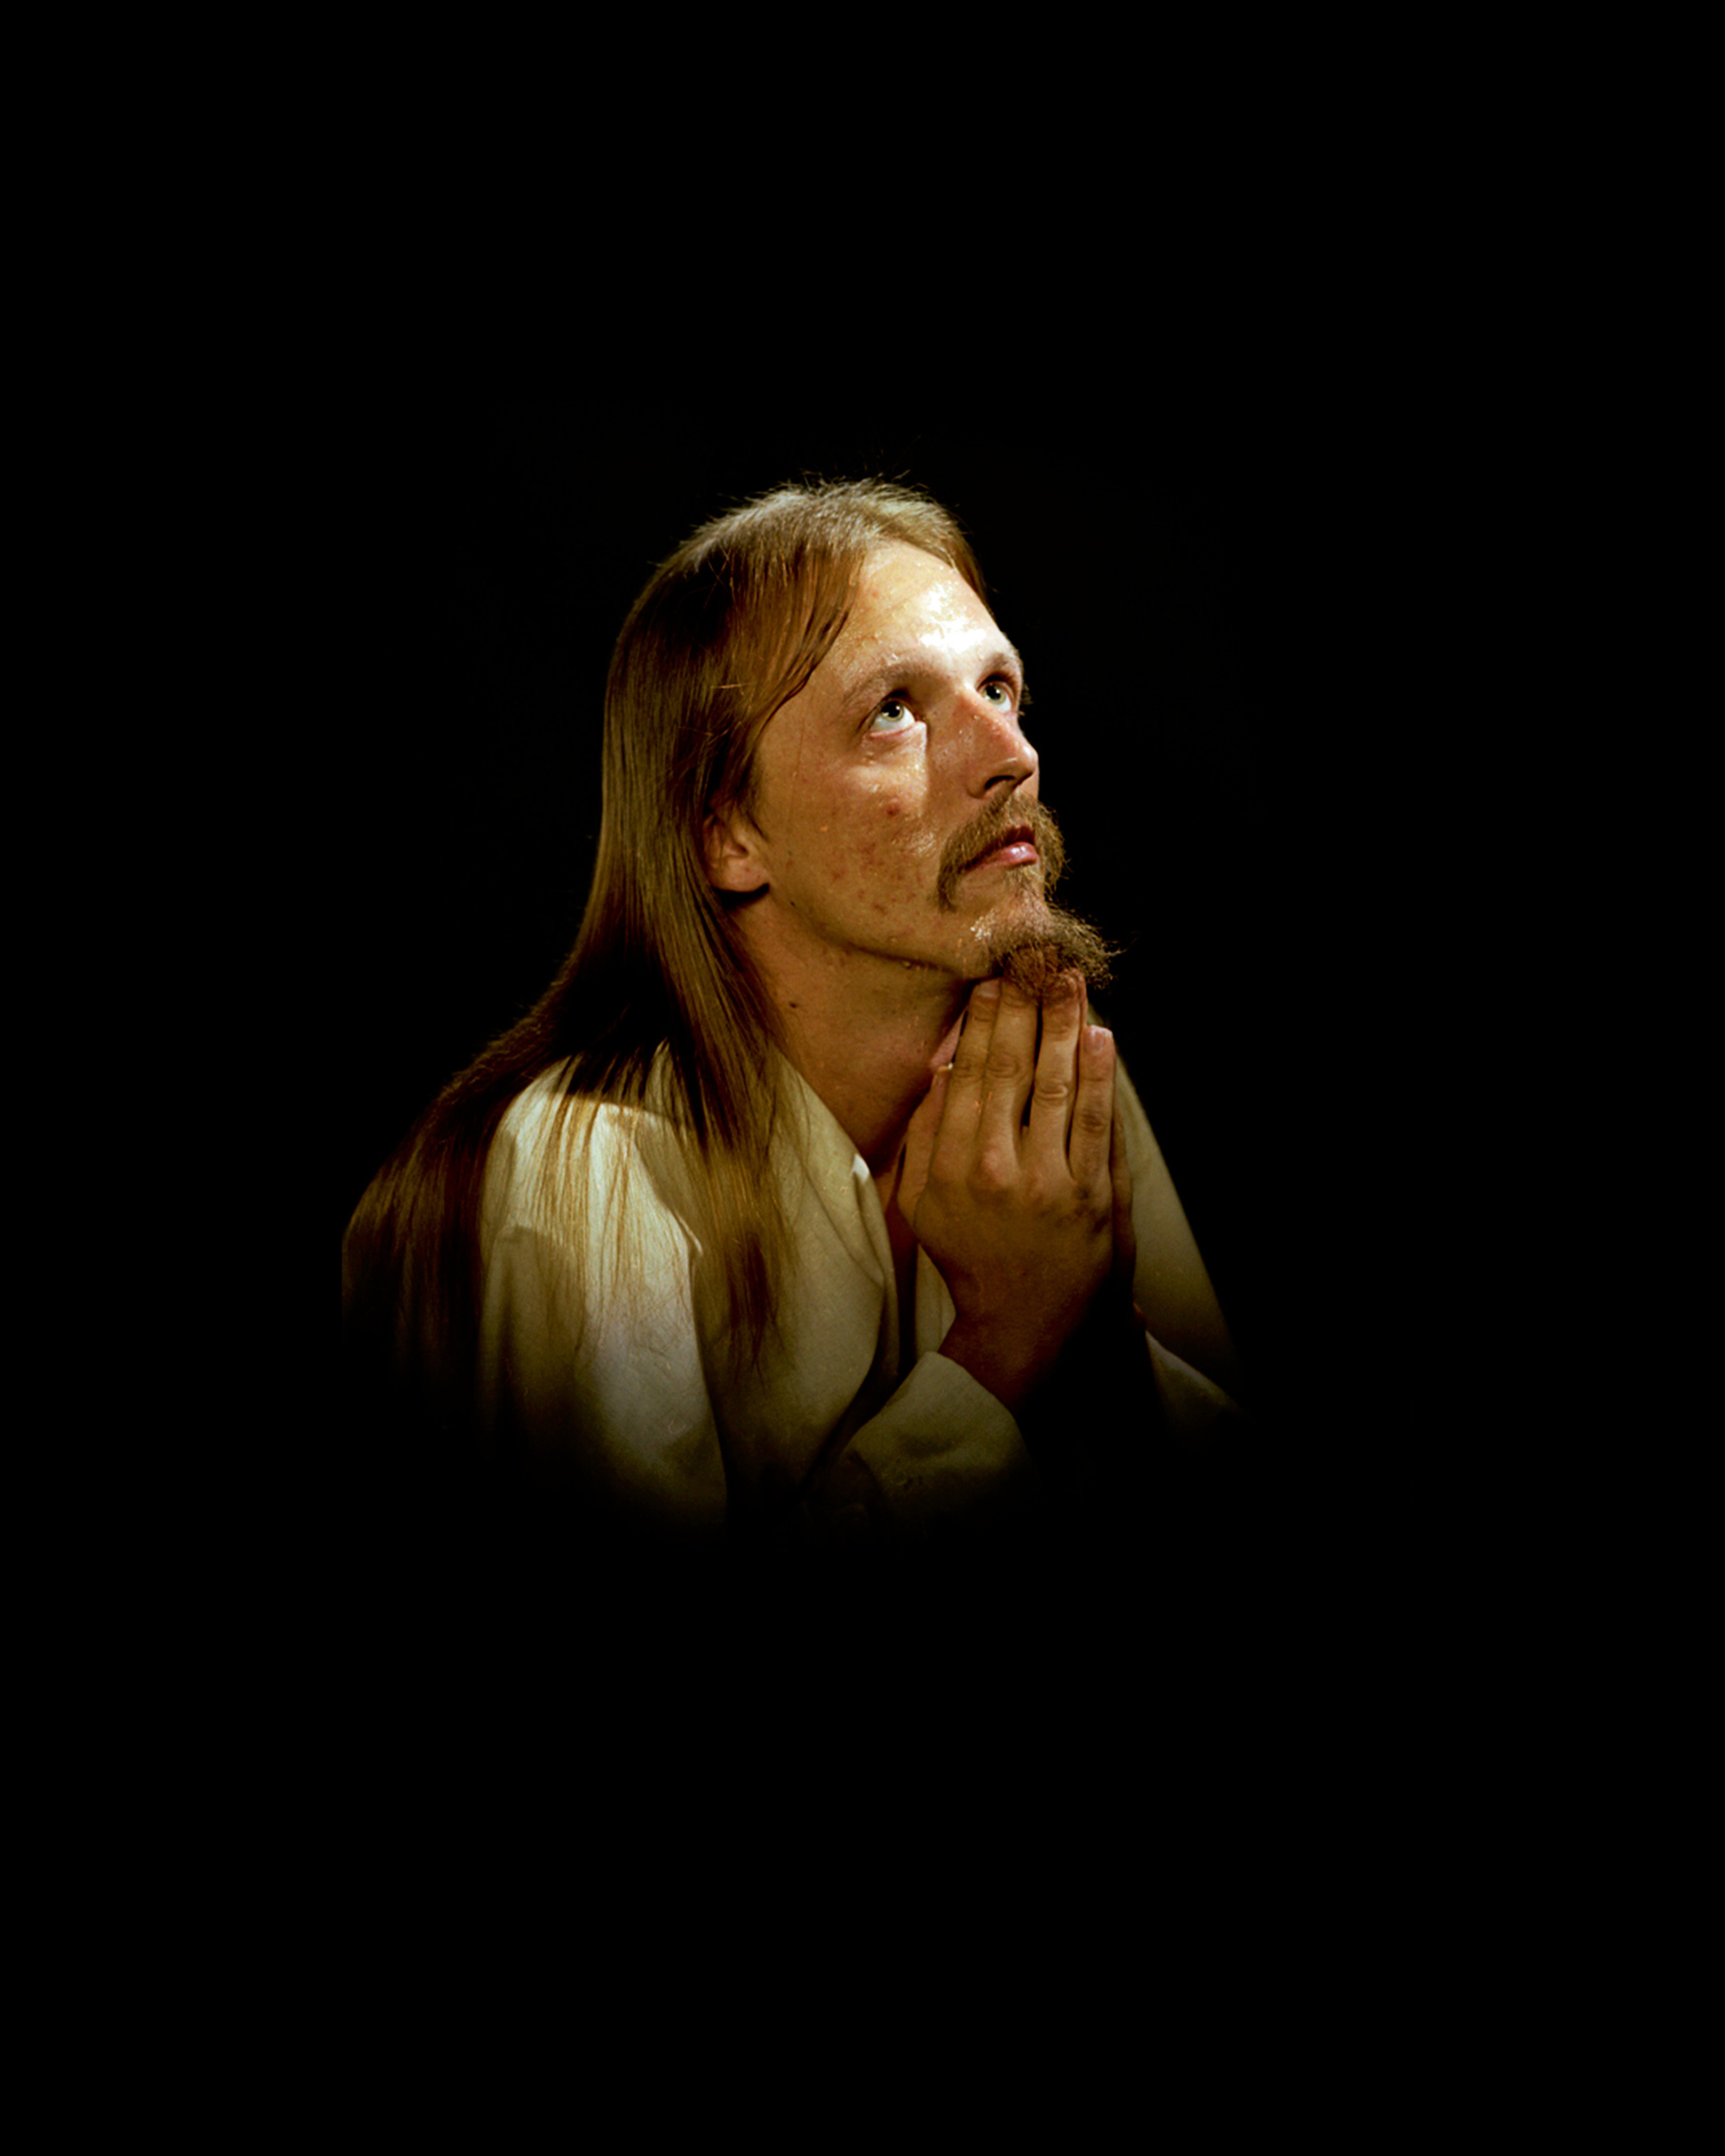 A photograph of a Christ-like man, with zits on his cheeks, praying. 